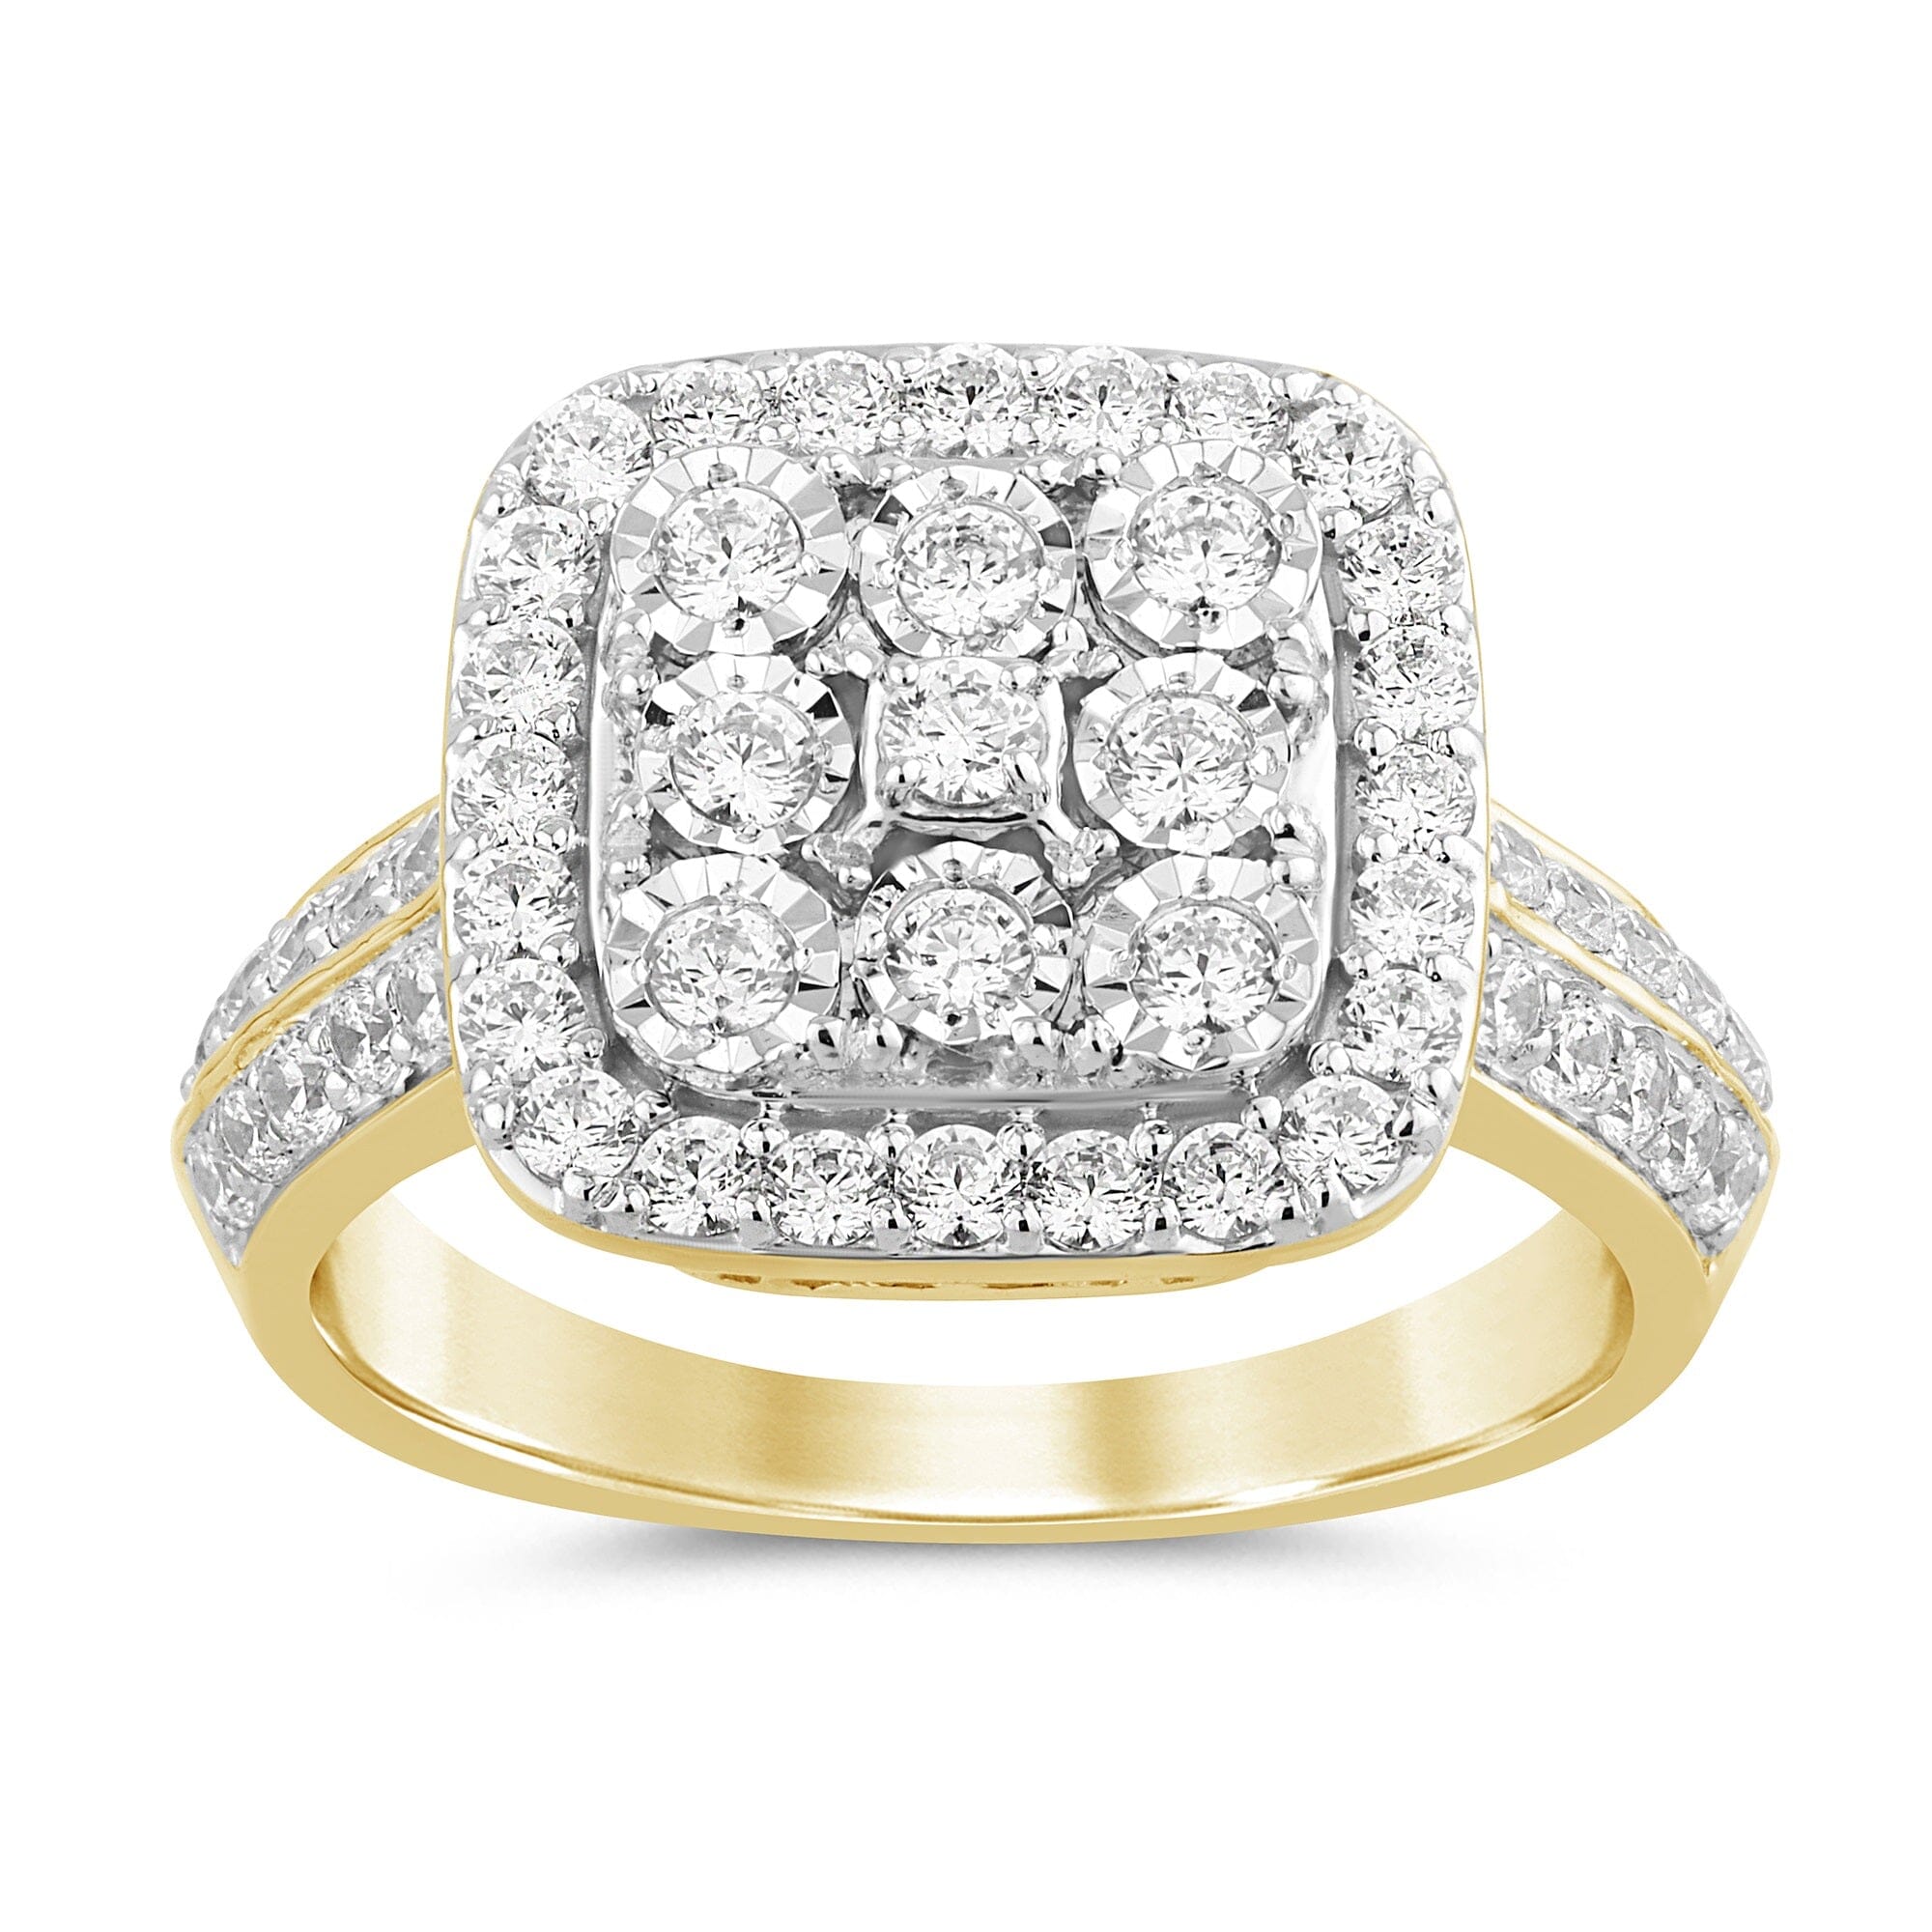 Meera Square Look Ring with 1.00ct of Laboratory Grown Diamonds in 9ct Yellow Gold Rings Bevilles 